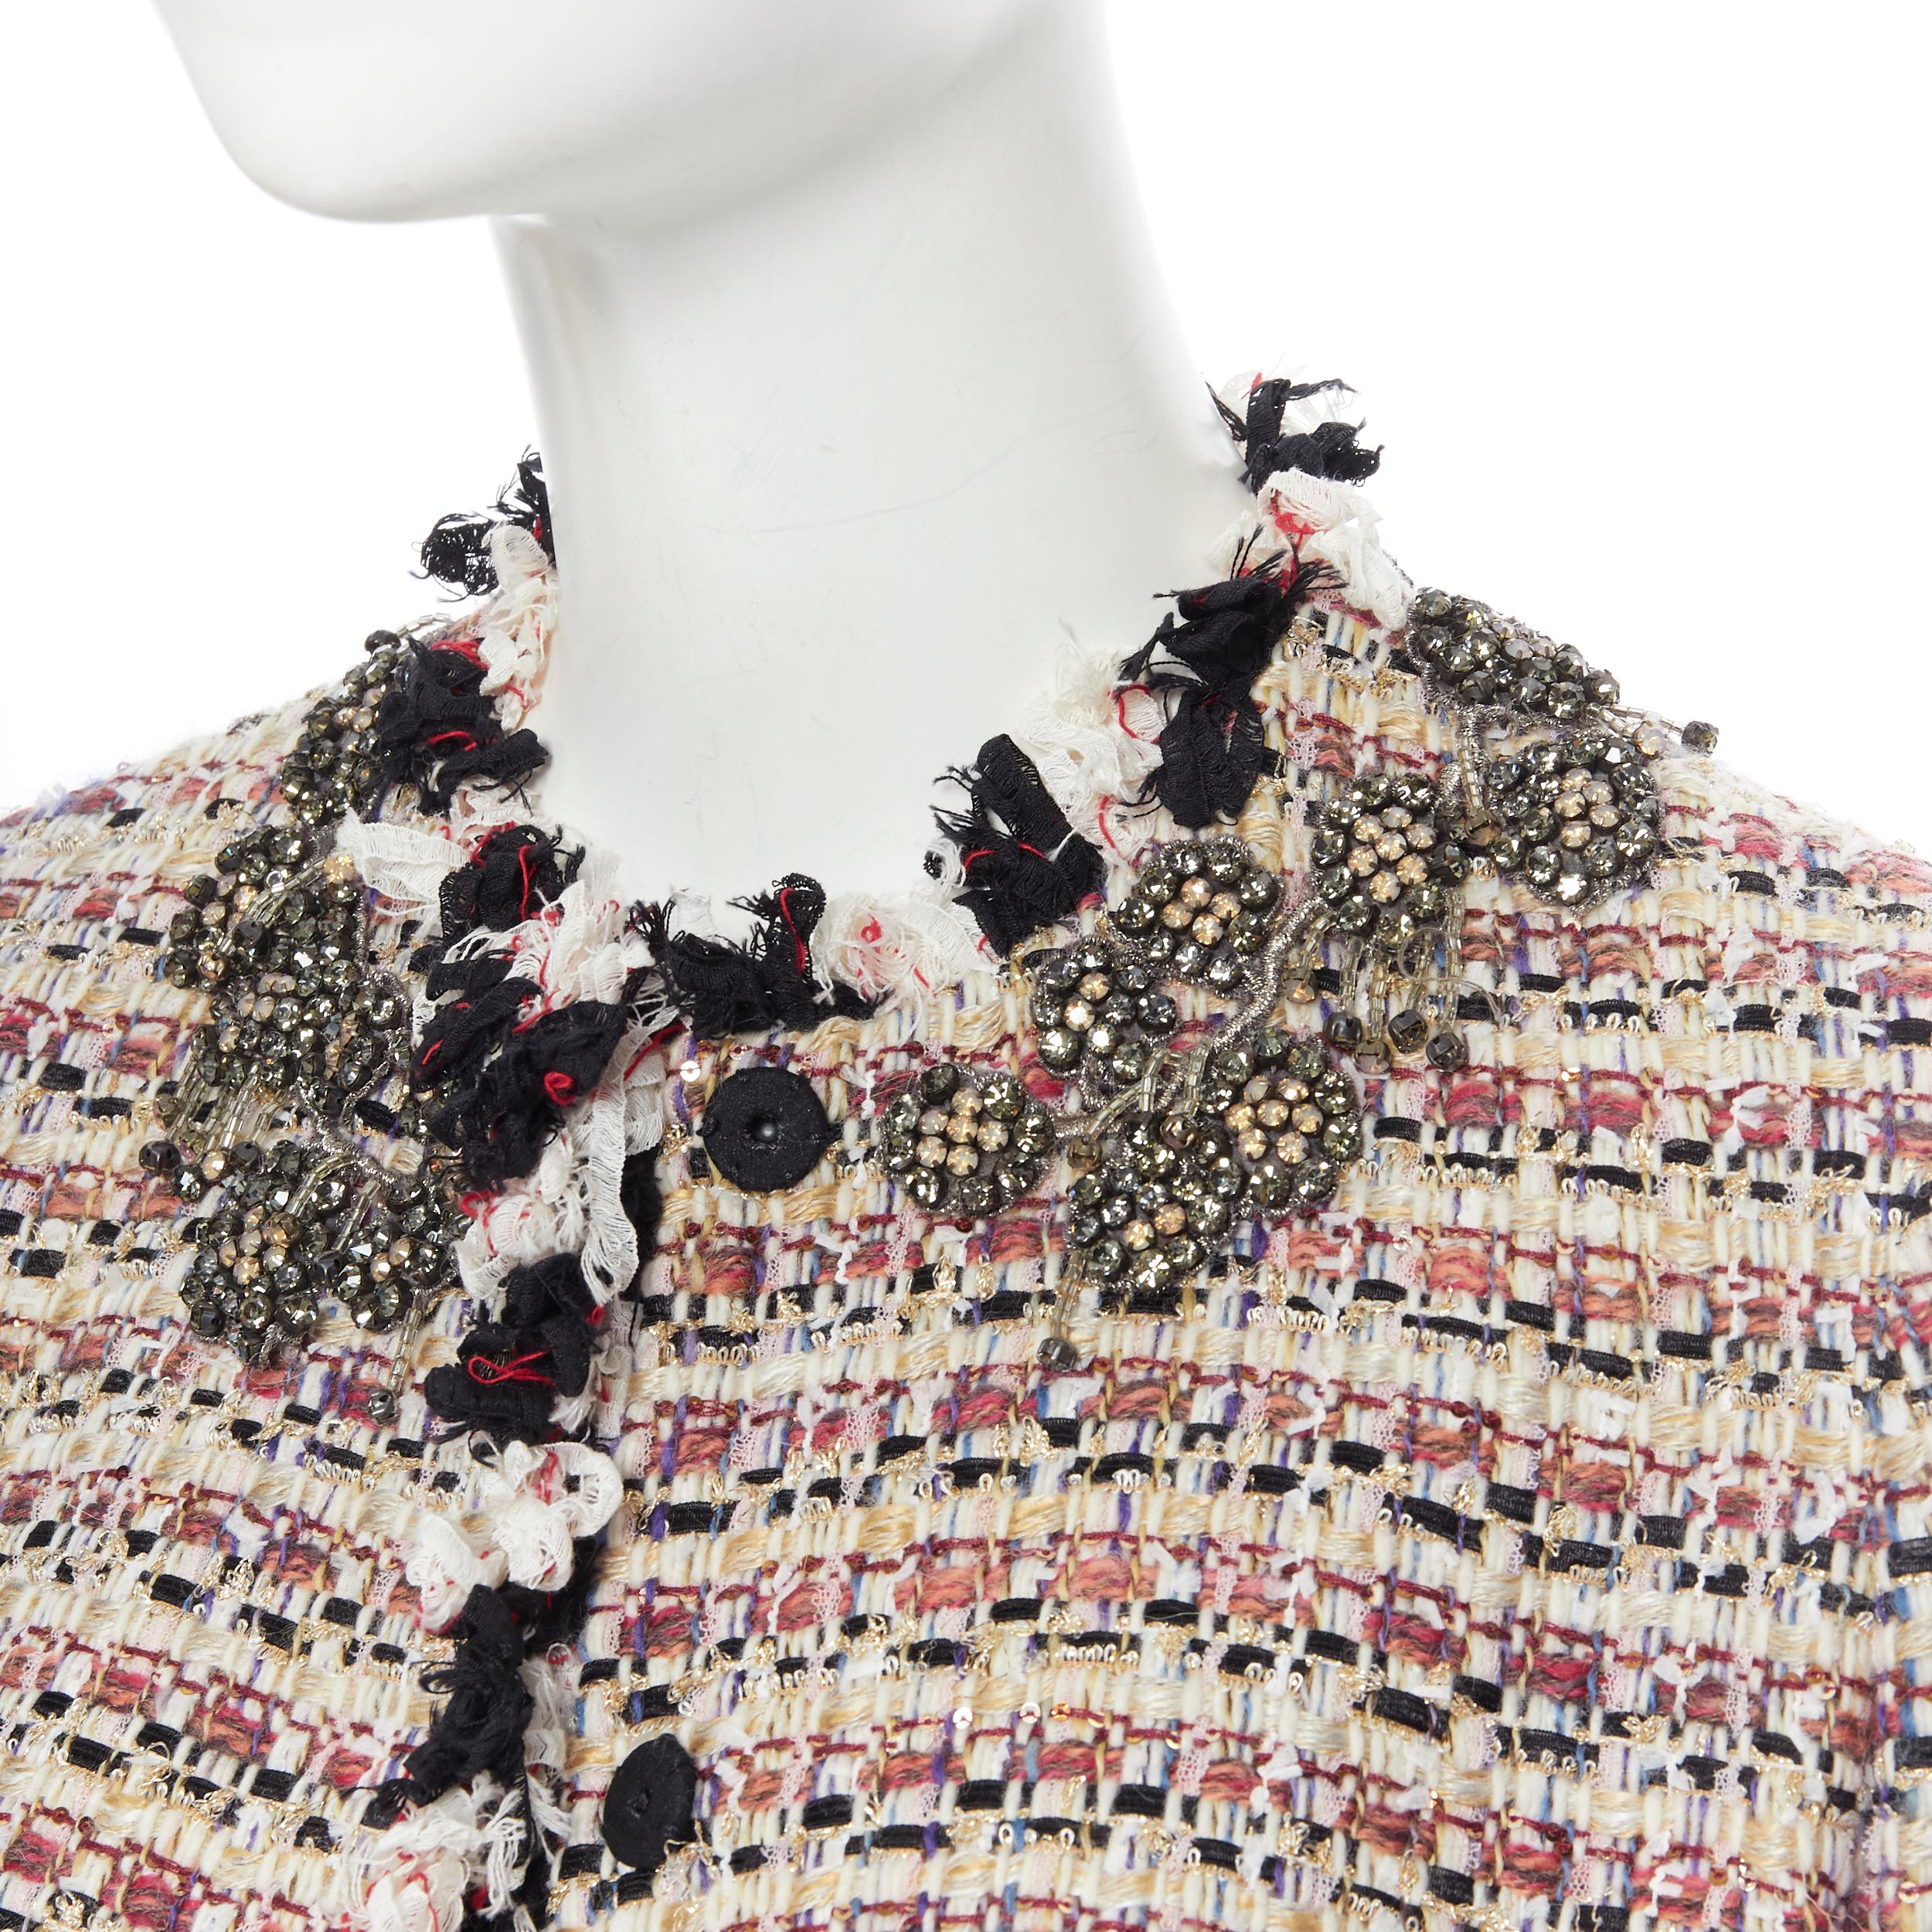 GIAMBATTISTA VALLI cream red sequins tweed crystal embellished collar jacket XXS
Brand: Giambattista Valli
Designer: Giambattista Valli
Model Name / Style: Tweed jacket
Material: Wool blend
Color: Beige
Pattern: Solid
Closure: Snap
Extra Detail: